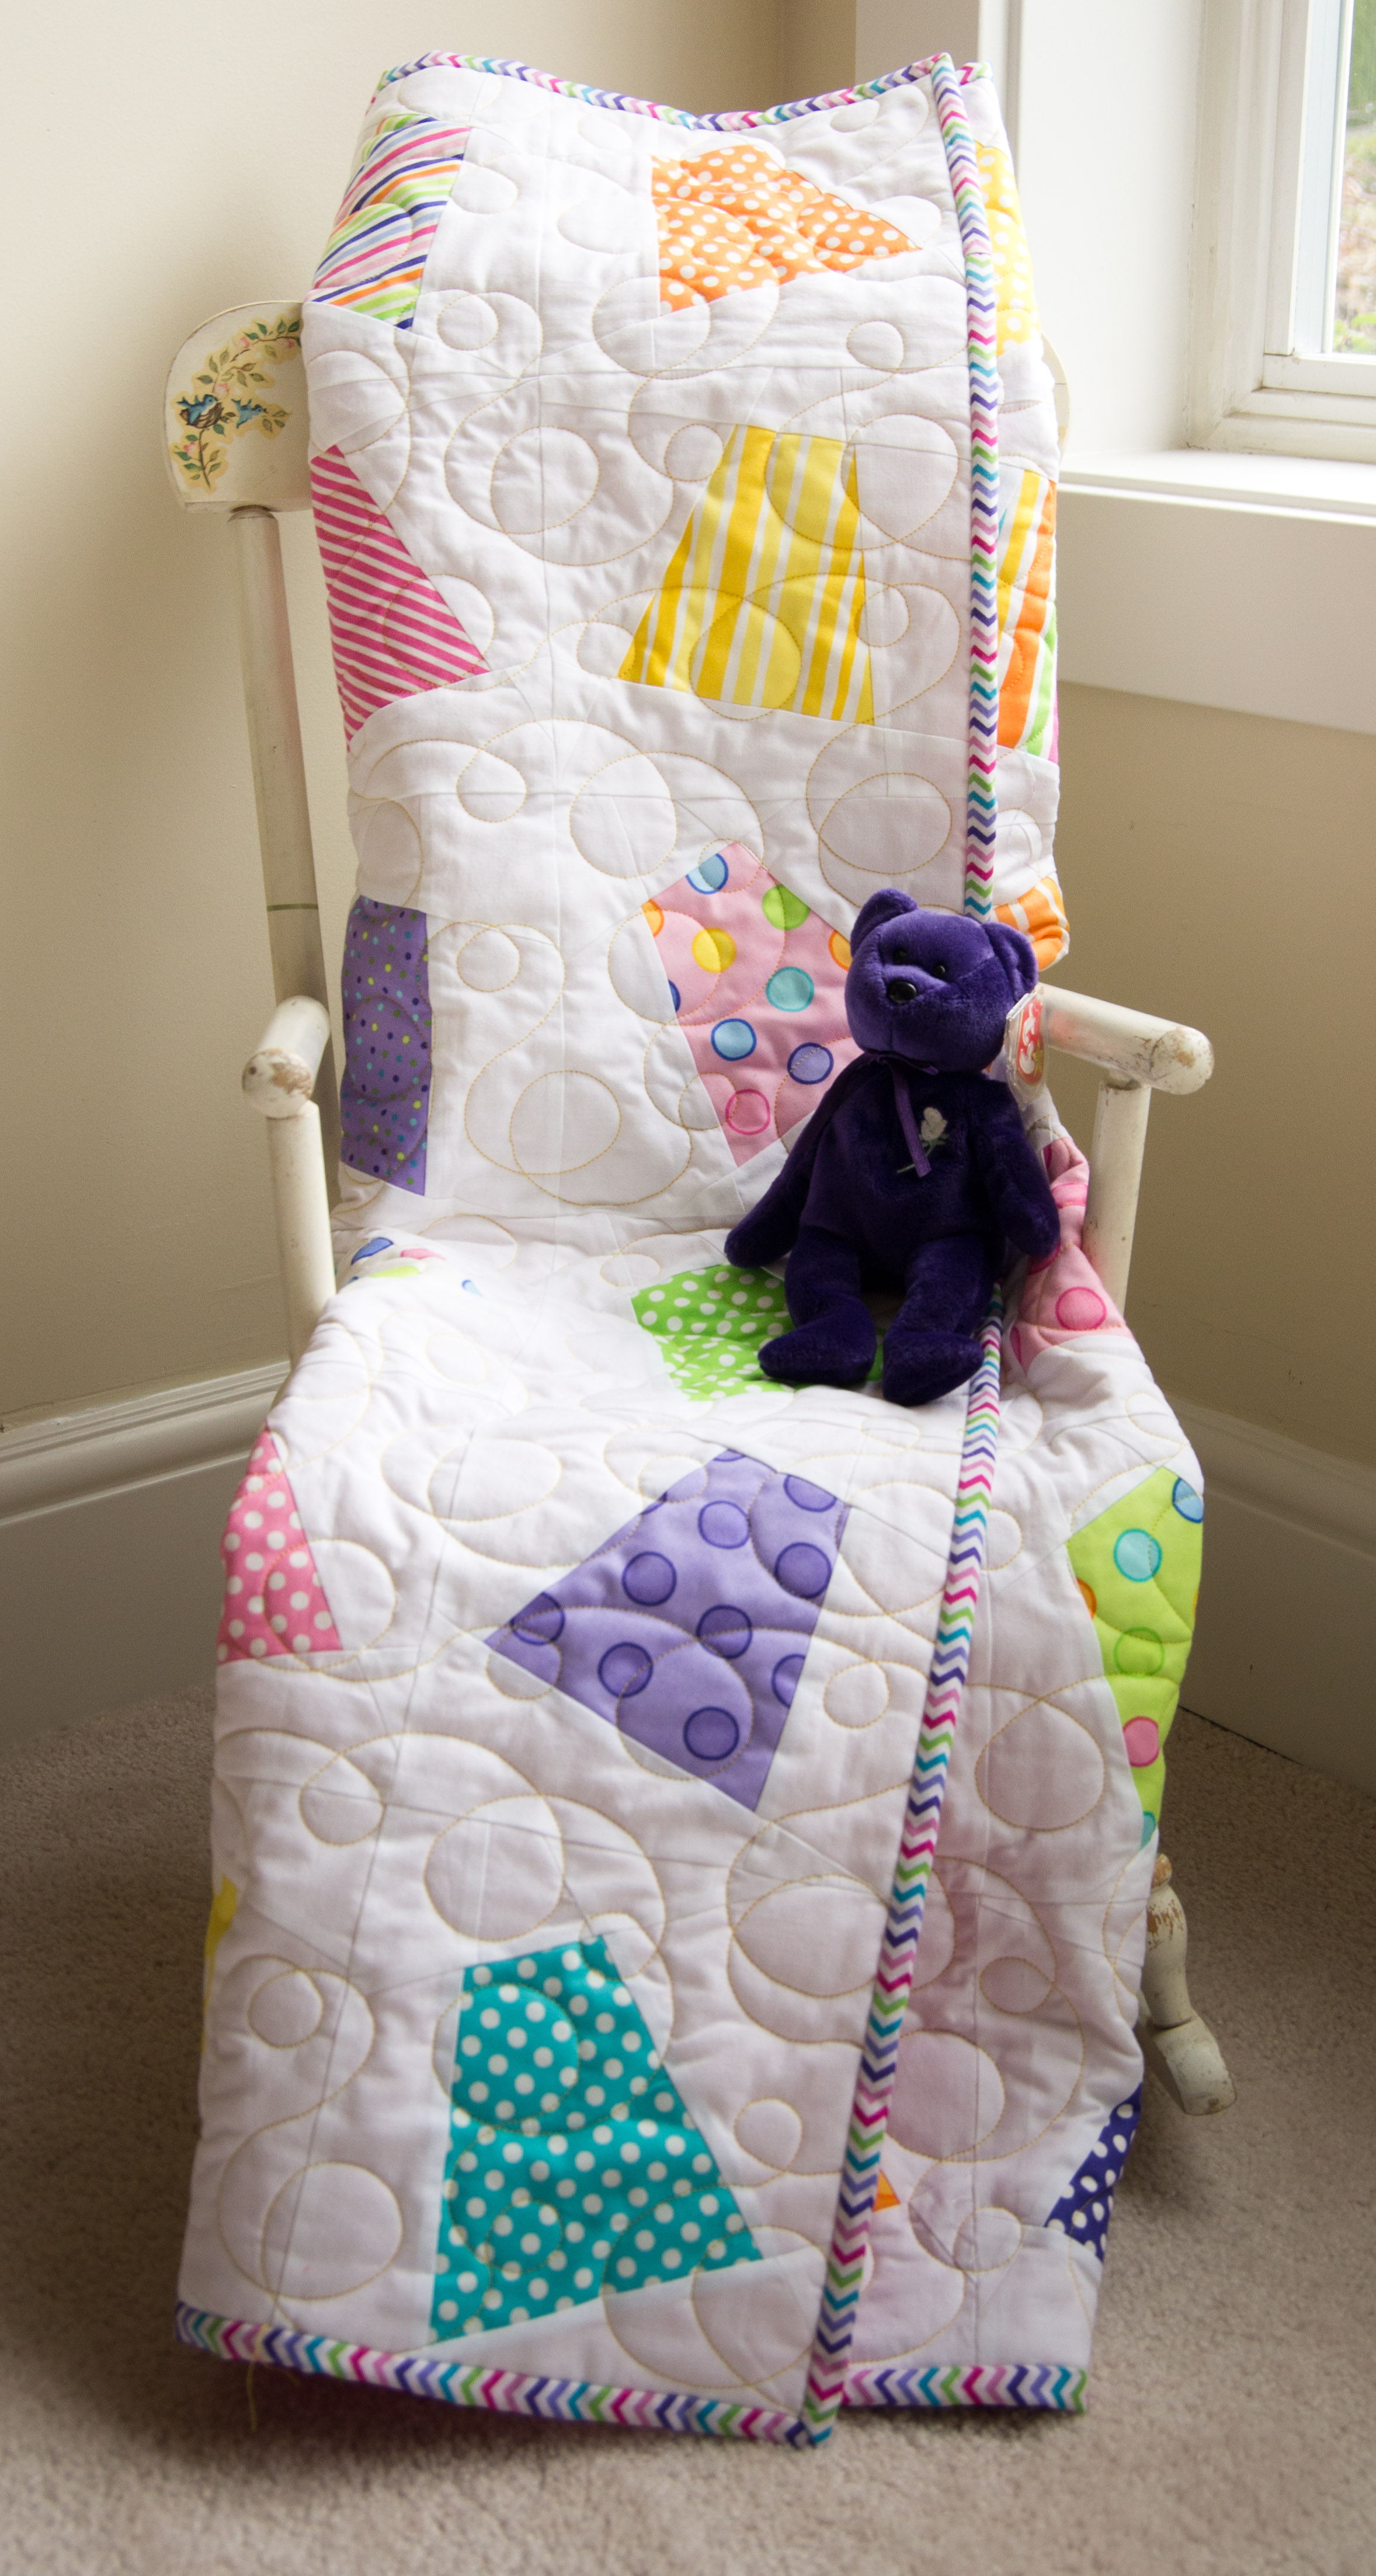 Tipsy Tumbler - cute and easy kids quilt! -